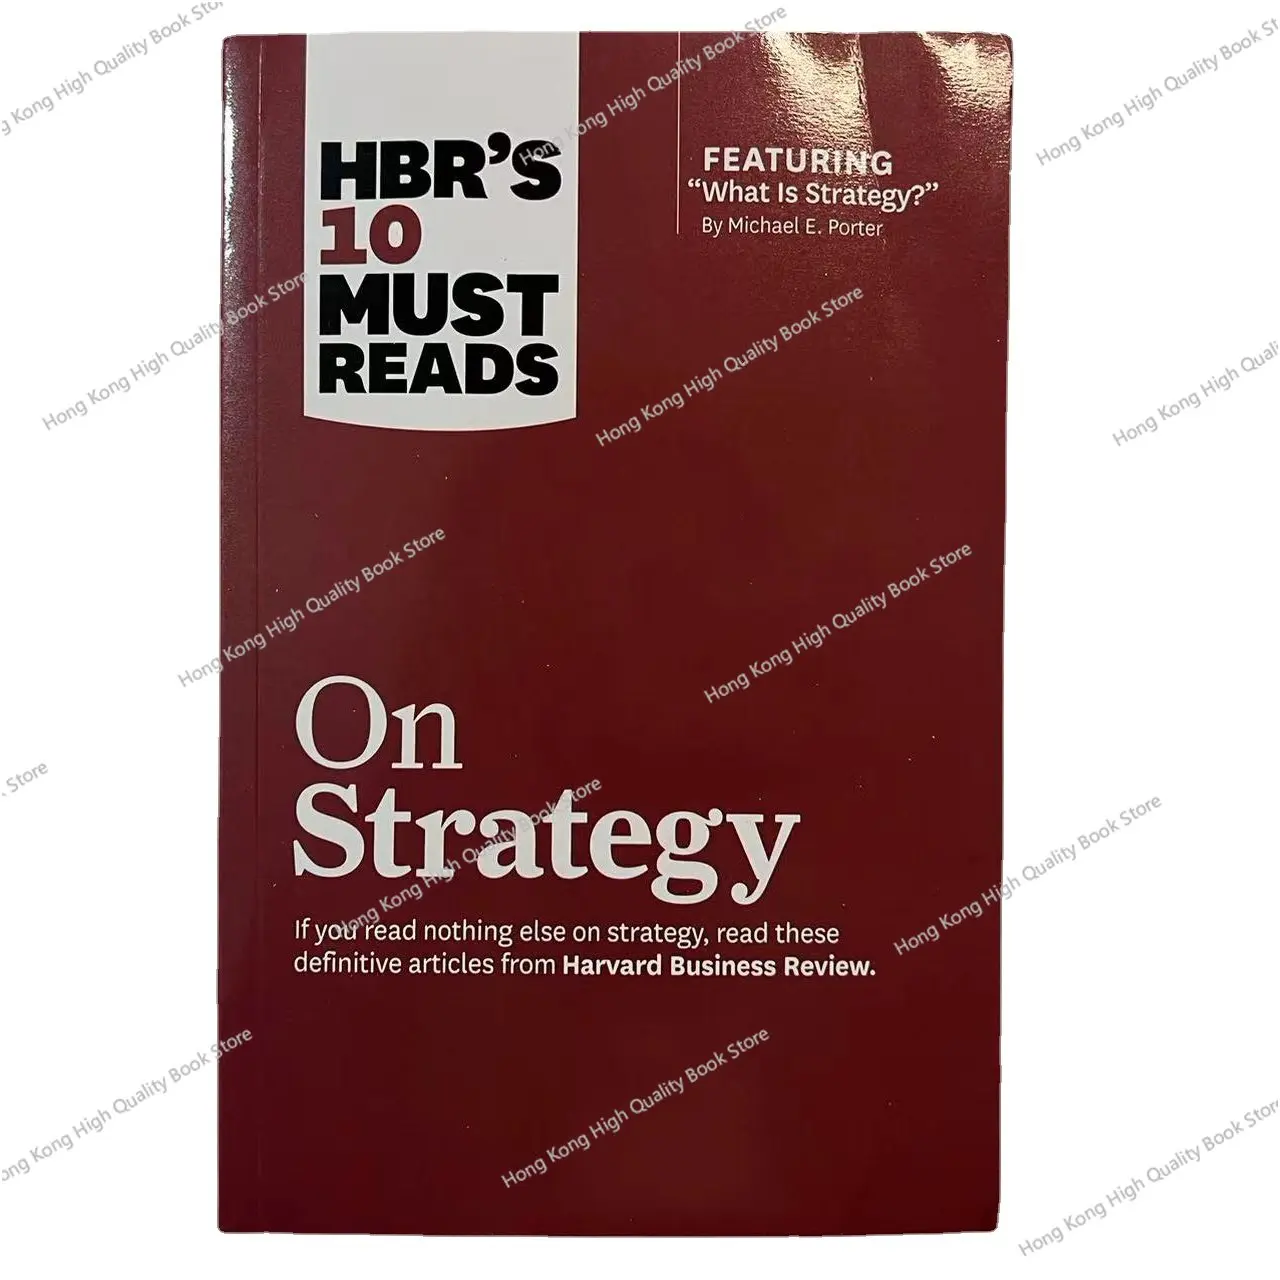 

HBR's 10 Must Reads on Strategy English Book Harvard Business Review Business Management Learning Reading Books for Adlut